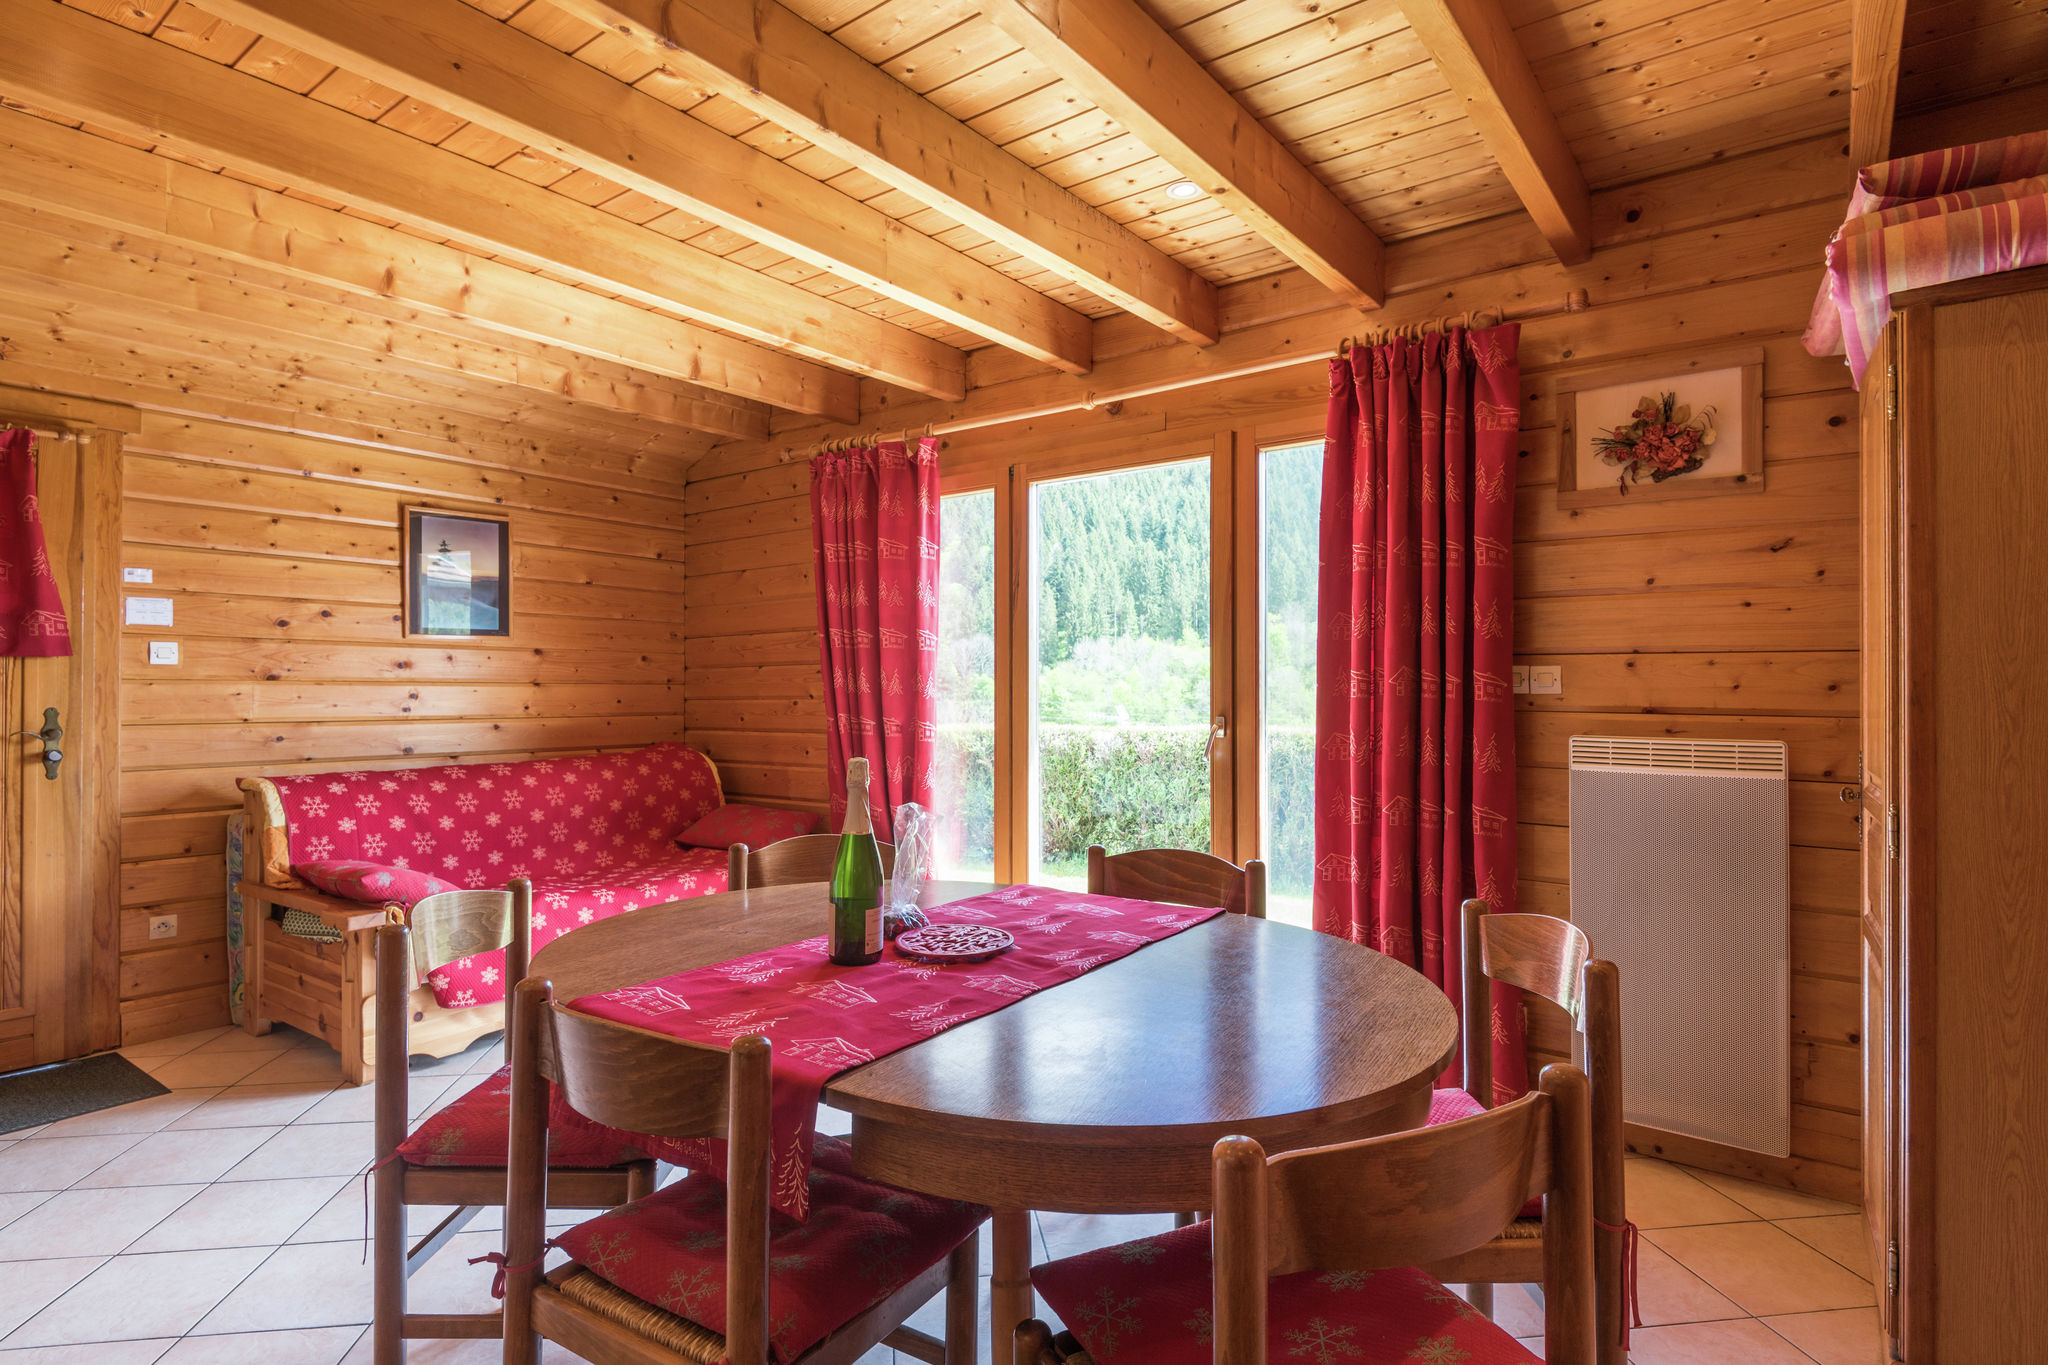 Chalet in lovely, rich forest setting with a beautiful view.